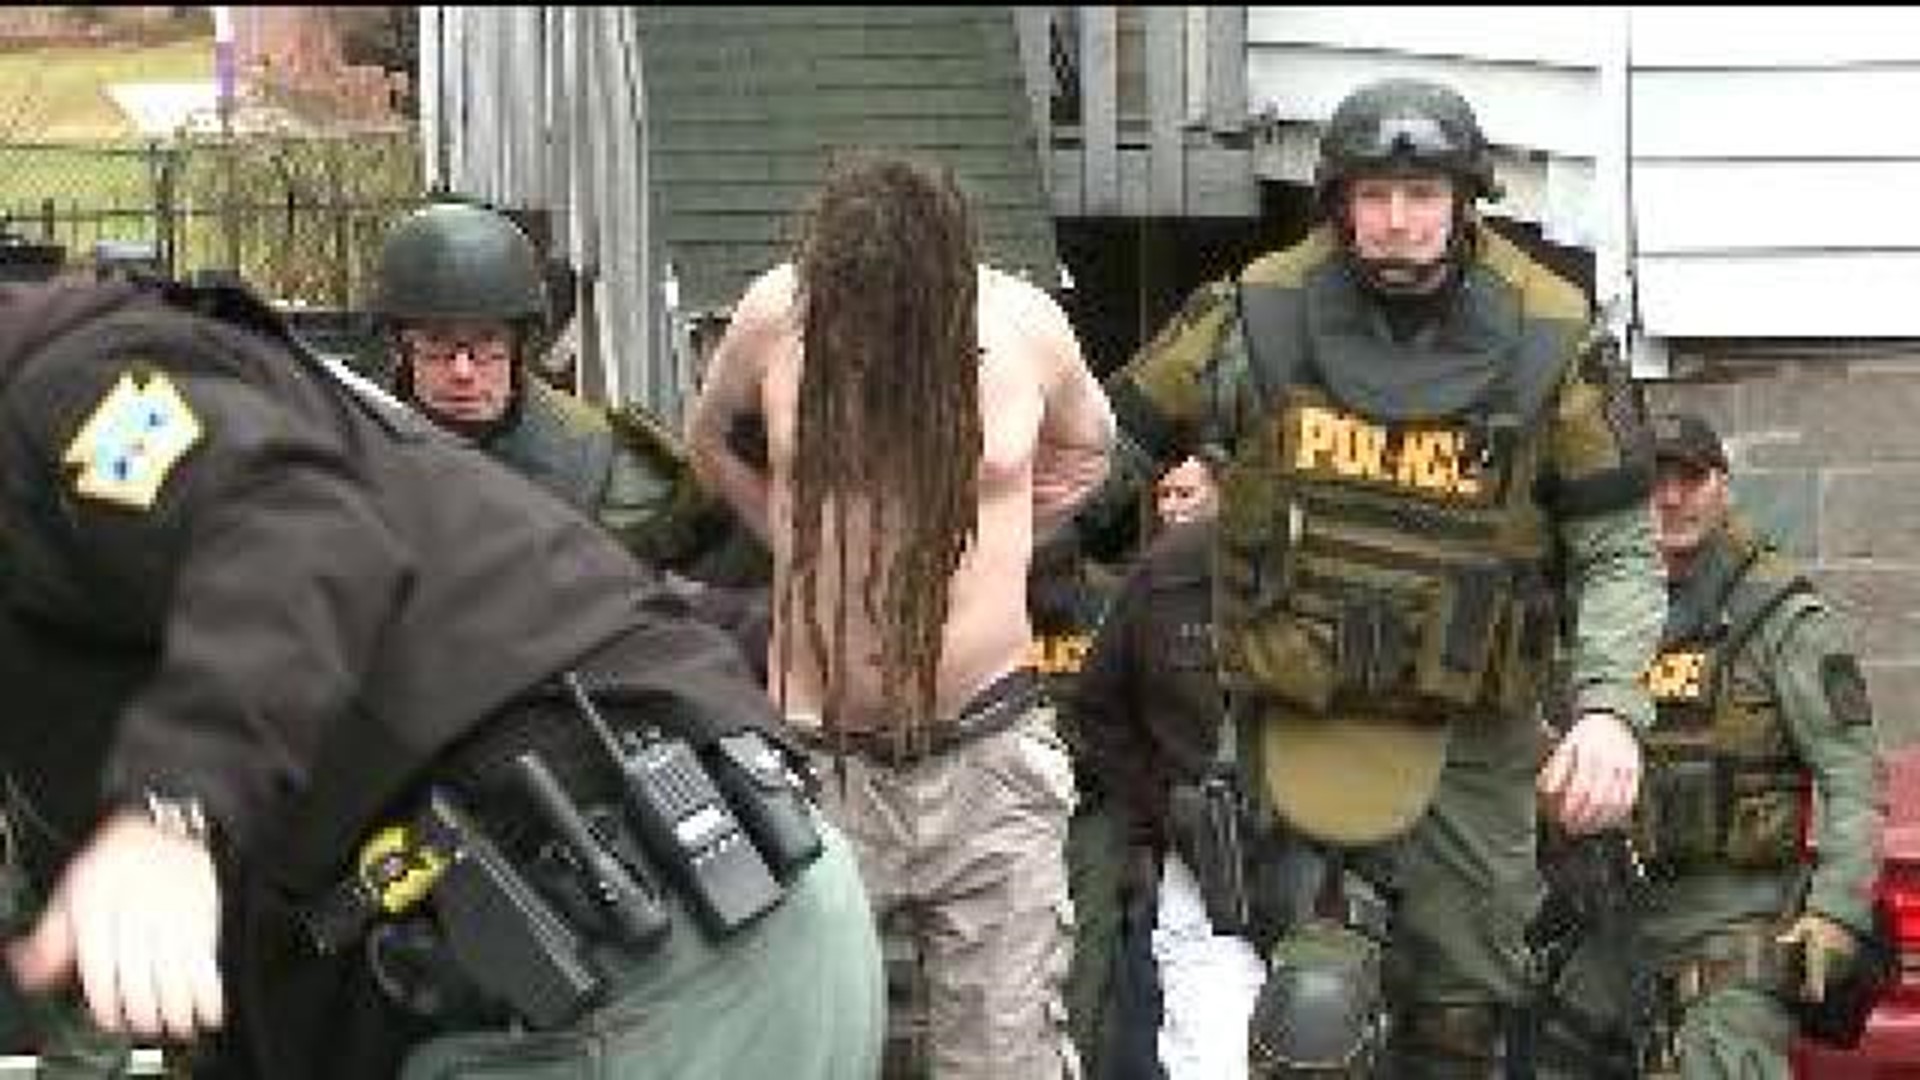 Suspect In Custody After Police Standoff